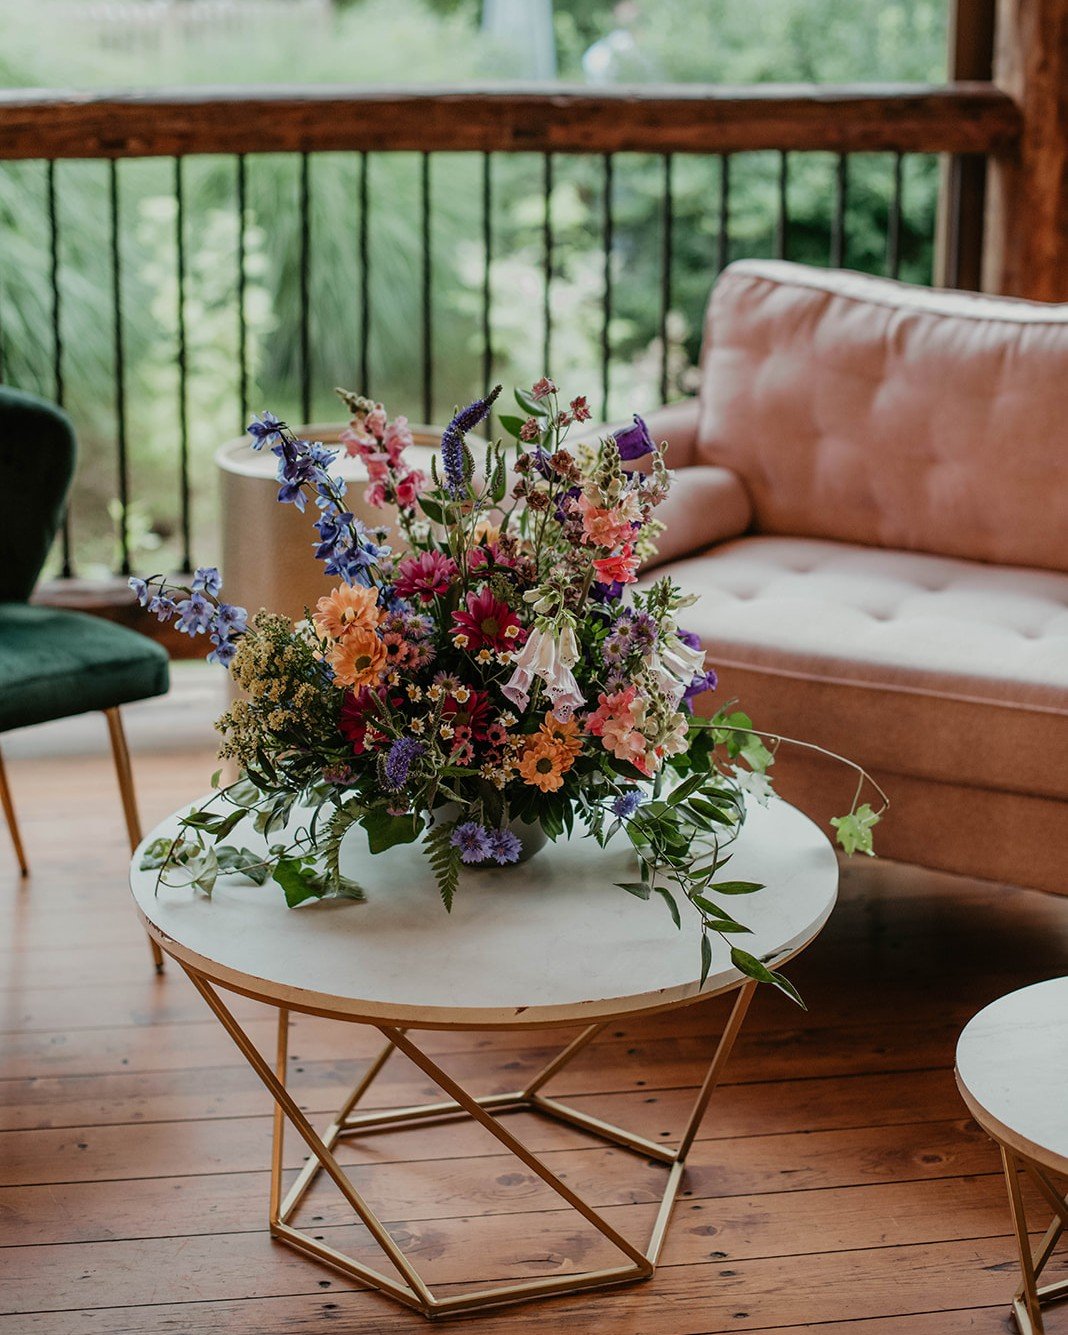 If you're having a lounge at your wedding, you definitely should think about incorporating flowers!

Whether it's bud vases, an arrangement, or something out of the box (stay tuned for a superrrr fun lounge design coming later this month!) florals al